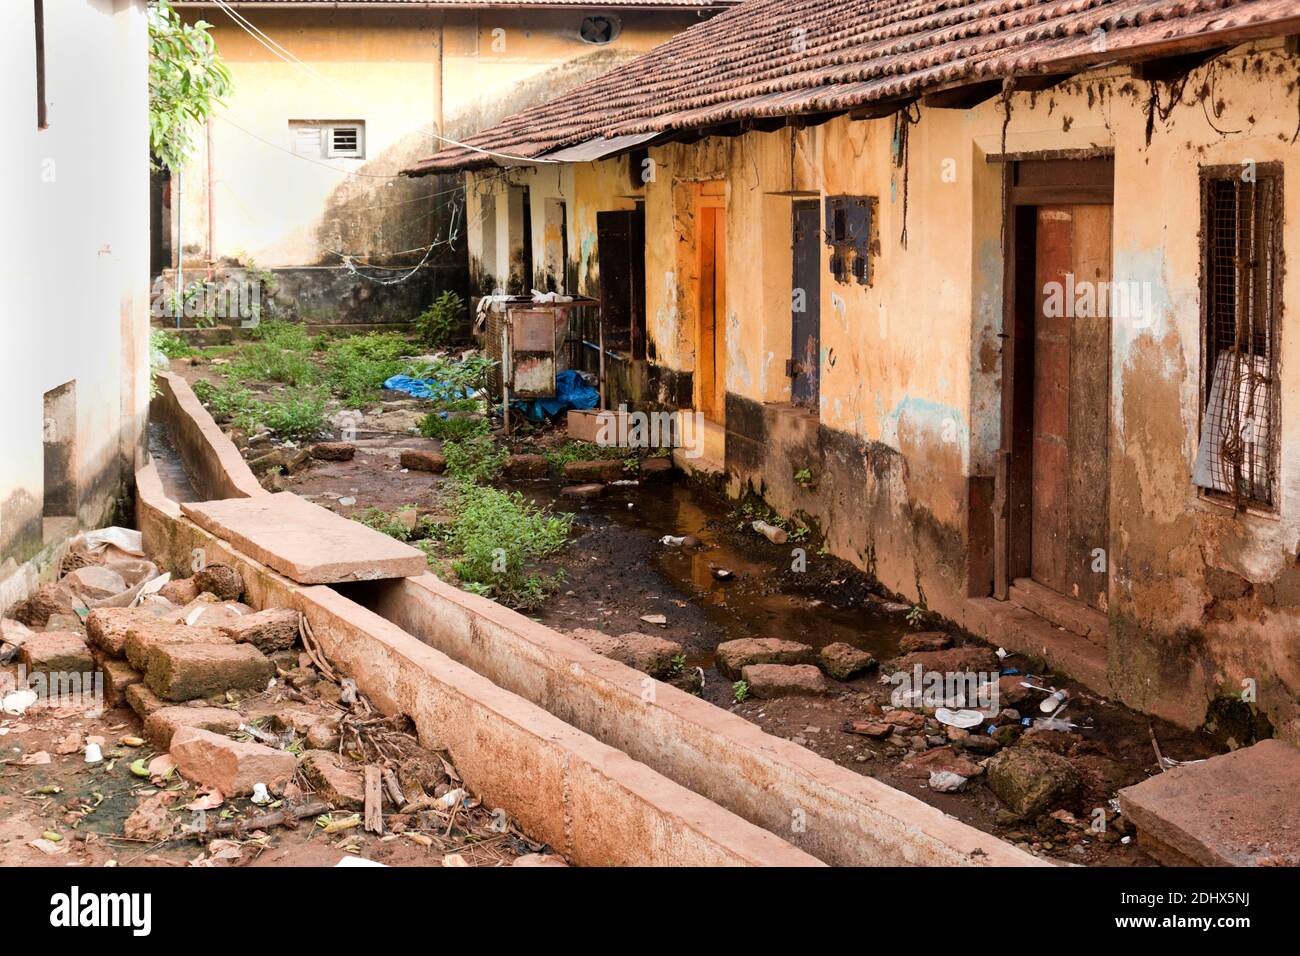 Back Street Slums, Mangalore India - open drains and run down housing. Deprivation and poverty is clear Stock Photo